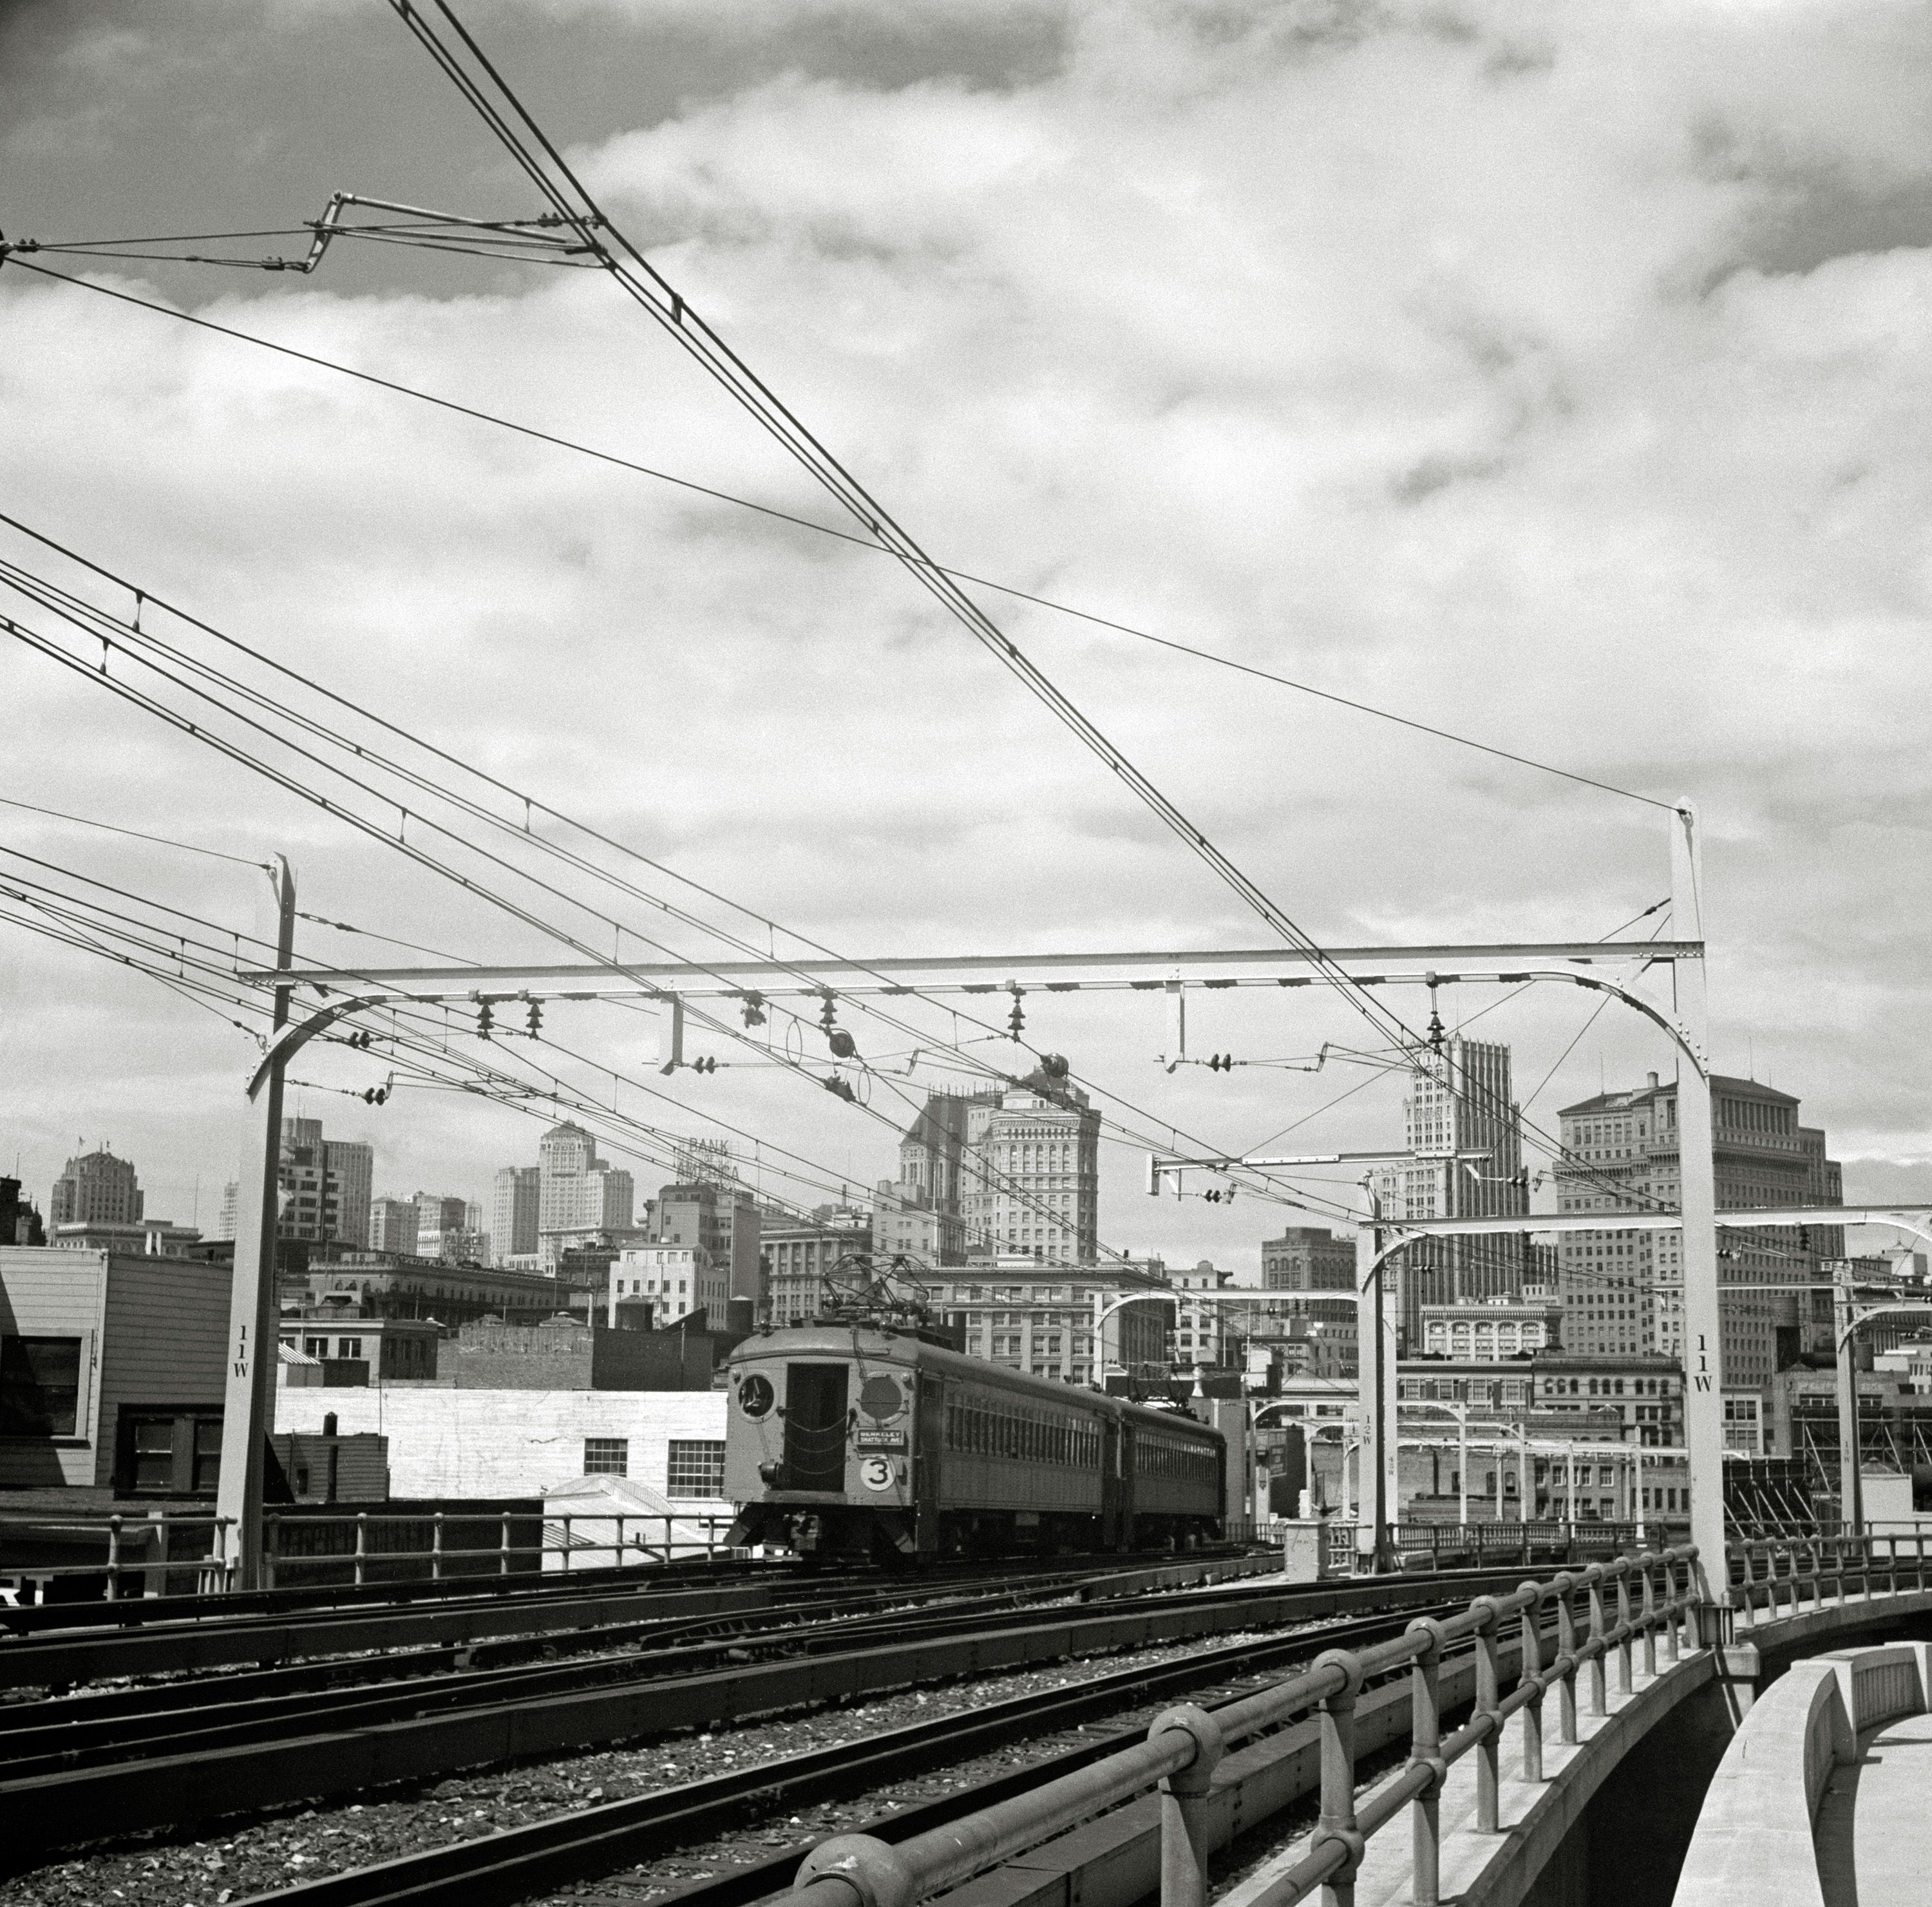 April 1939. "San Francisco, California, seen from the First Street ramp of the San Francisco-Oakland Bay Bridge." Before BART (Bay Area Rapid Transit) crossed the bay, there was the Key System. Photo by Dorothea Lange. View full size.